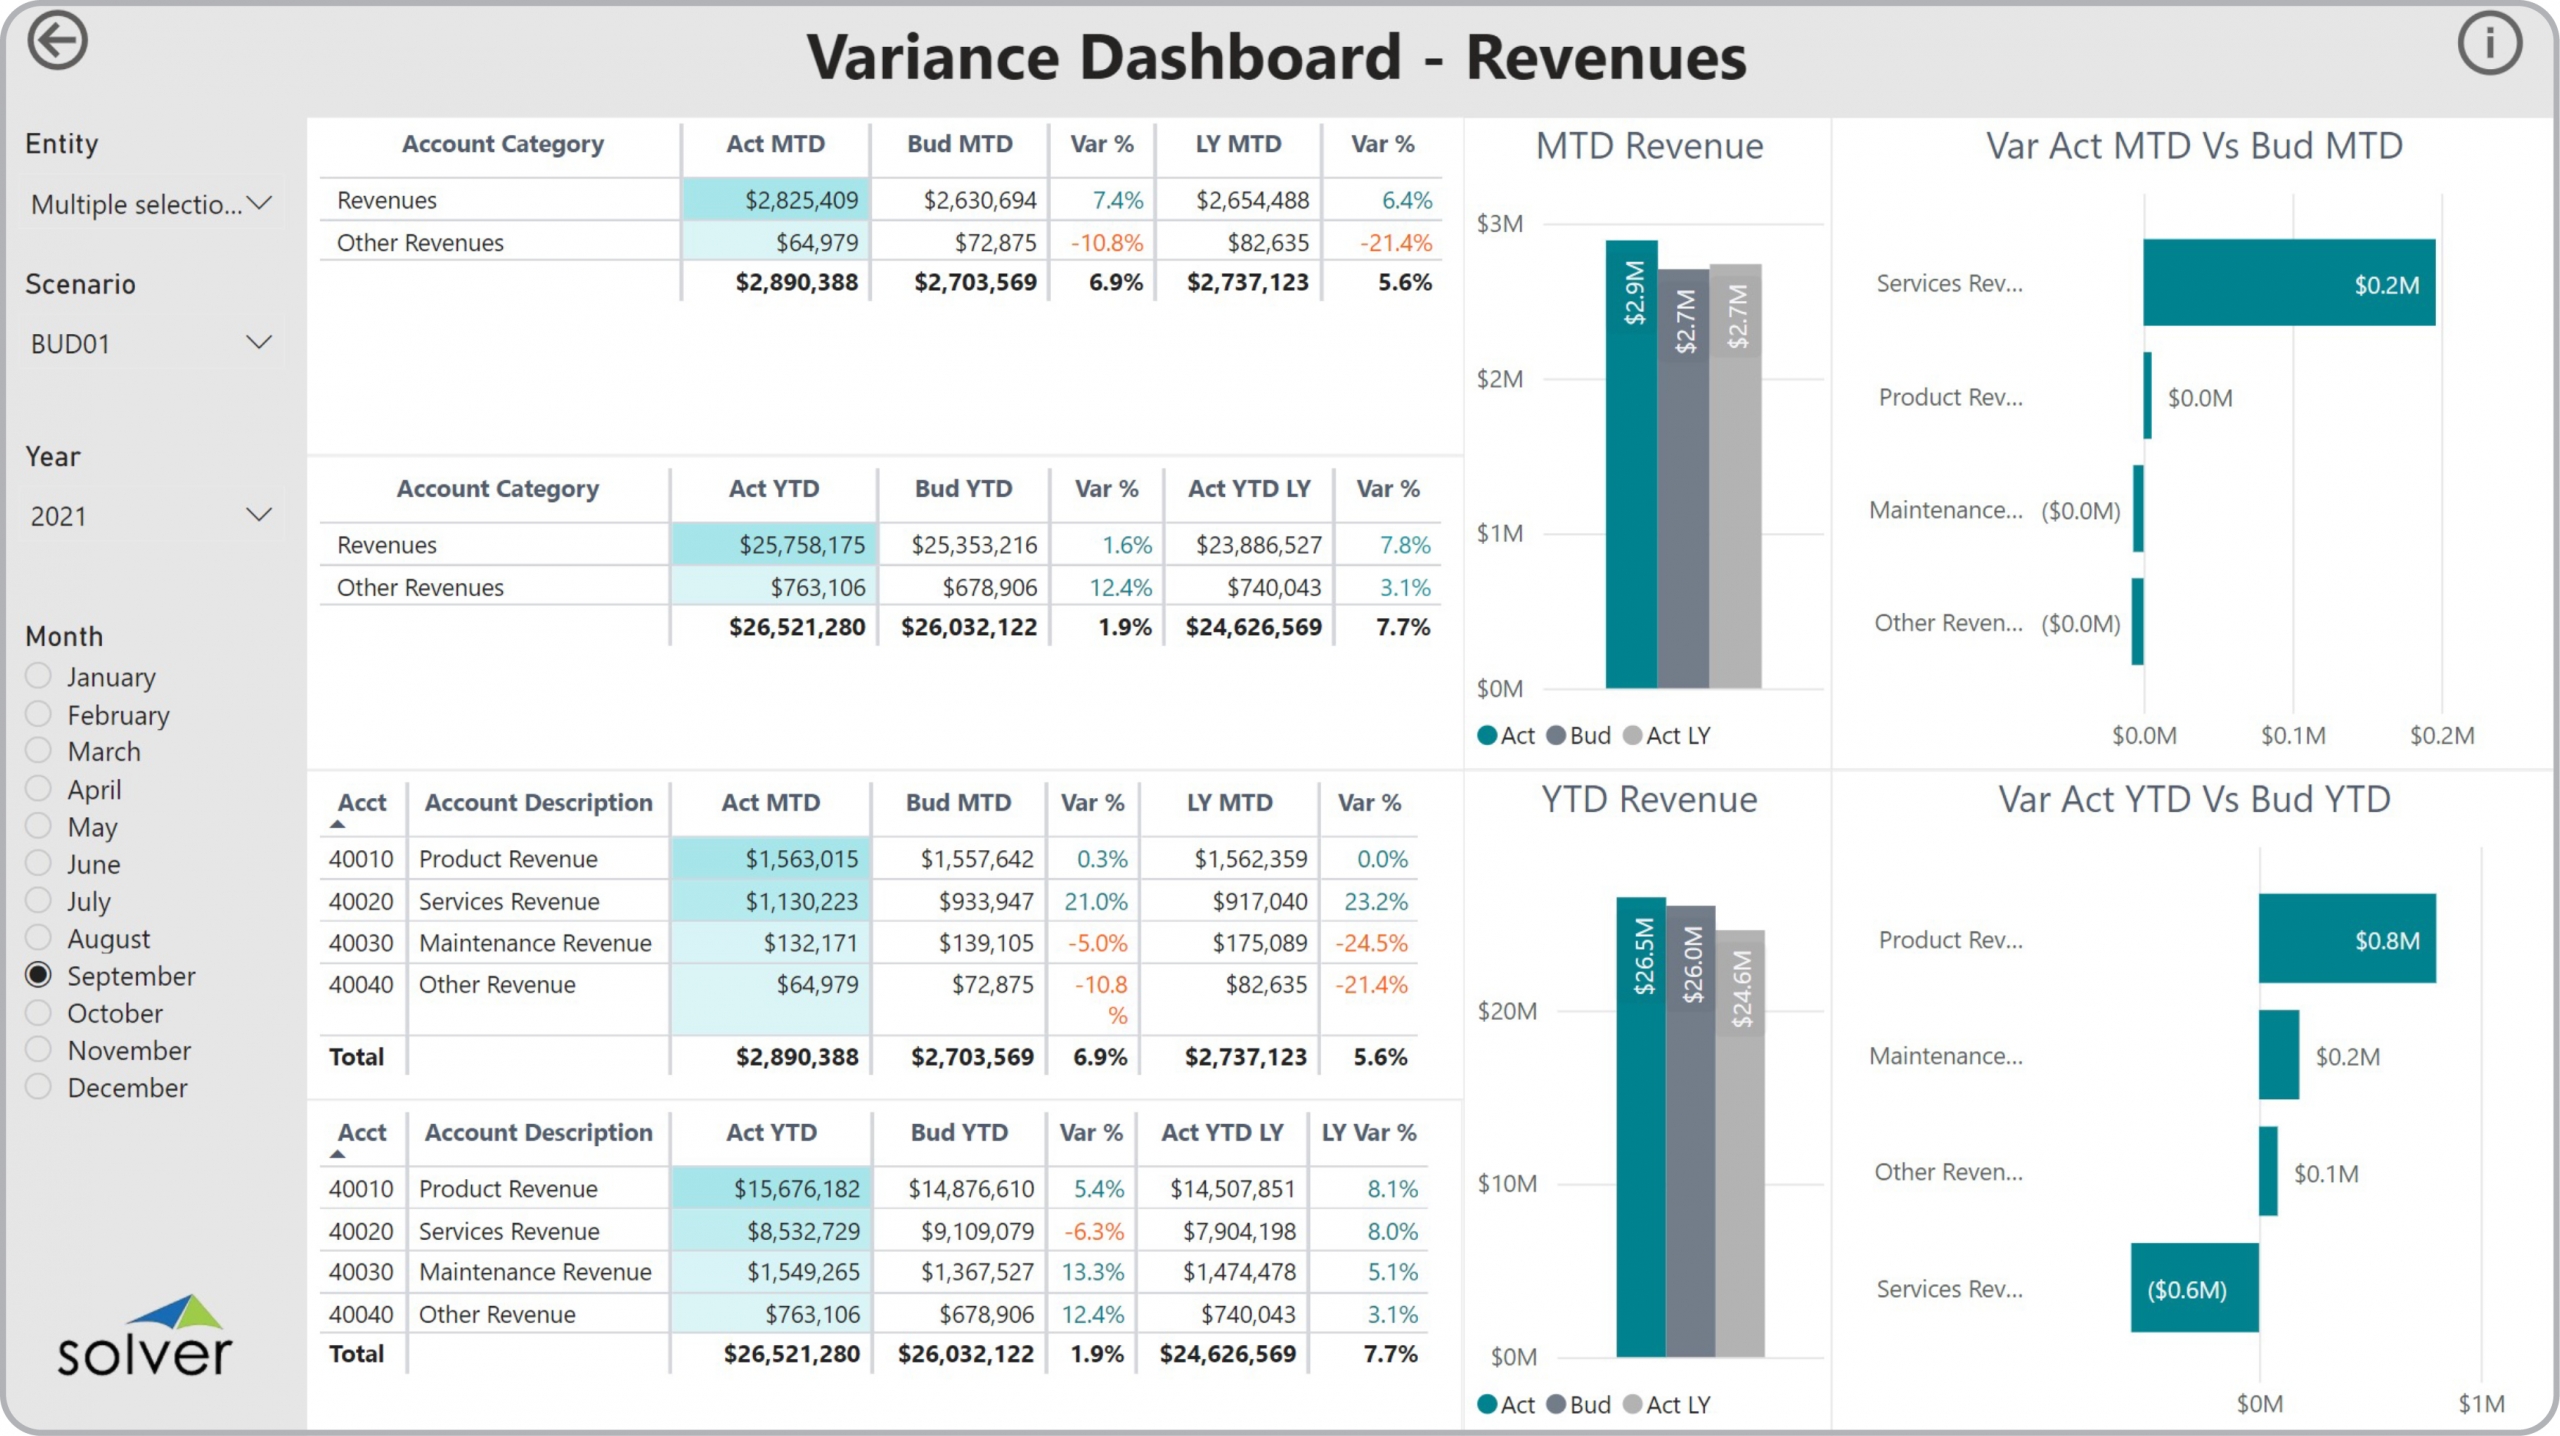 Example of a Revenue Variance Dashboard to Streamline the Monthly Analysis Process